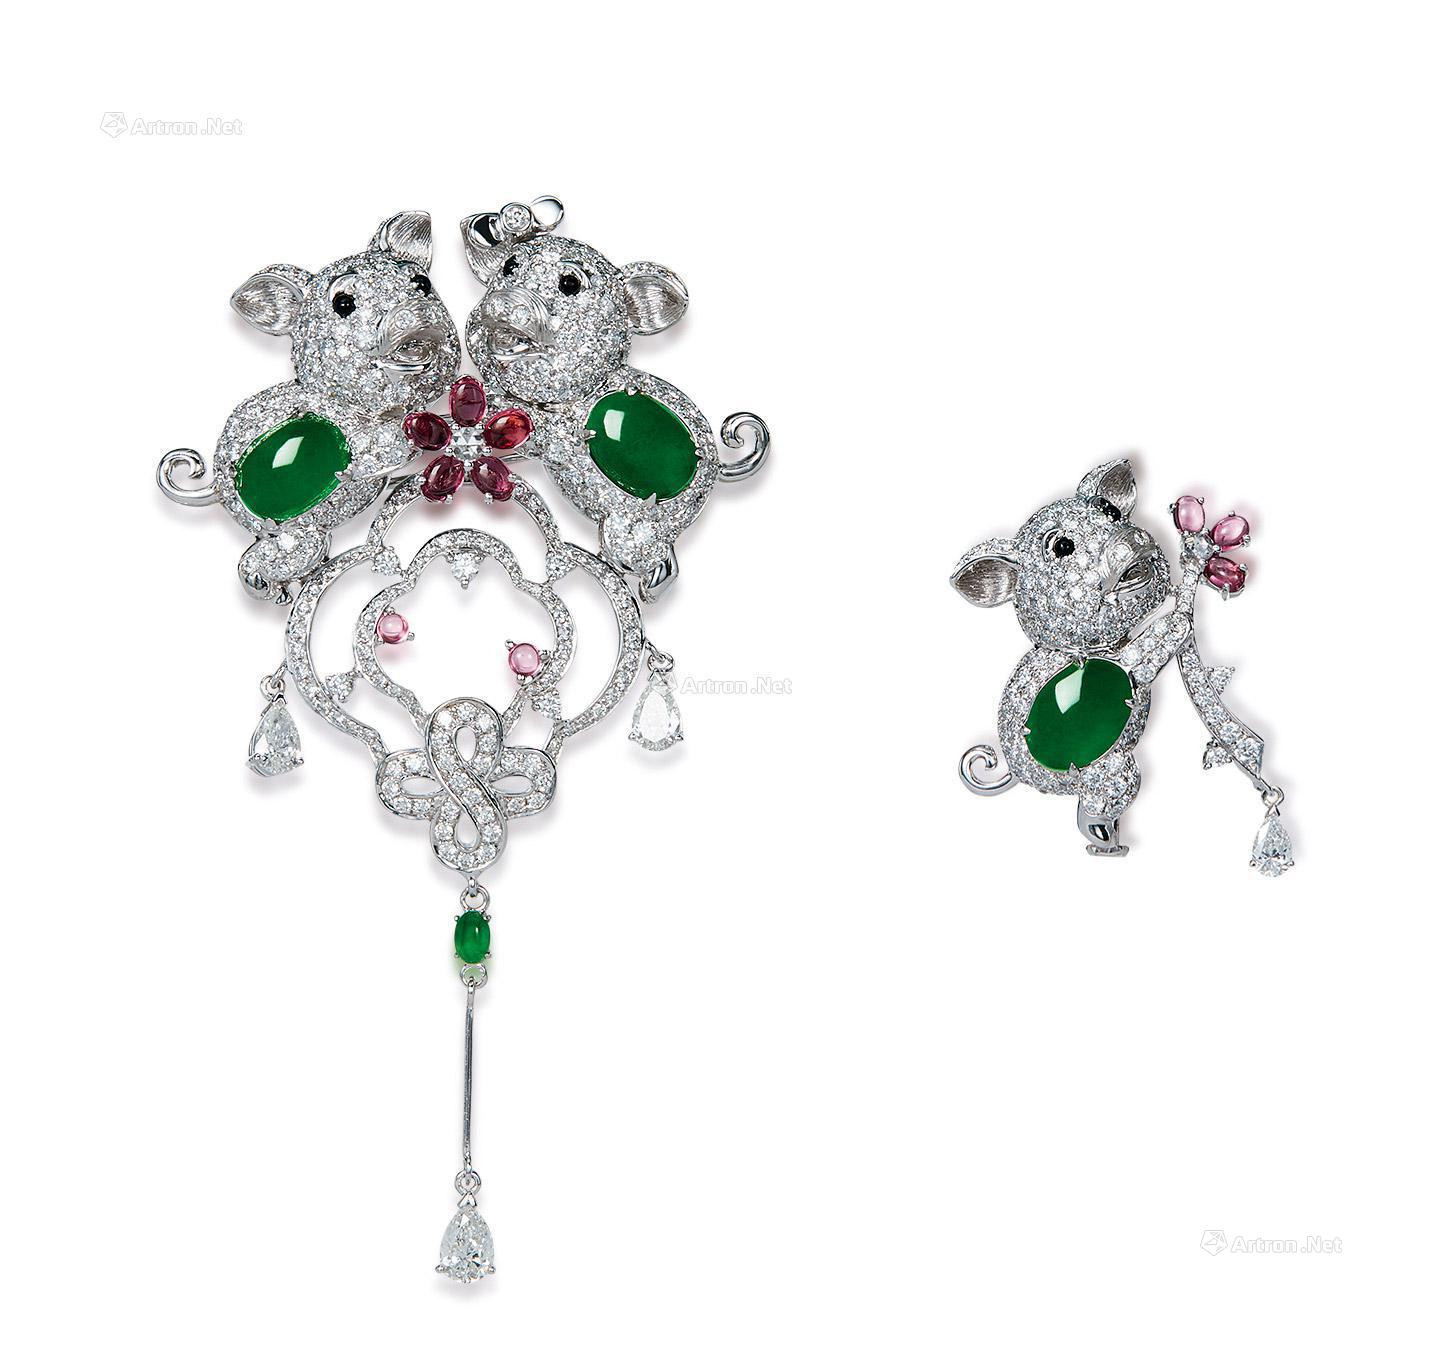 A BURMESE JADEITE，DIAMOND AND COLORED BROOCH MOUNTED IN 18K WHITE GOLD